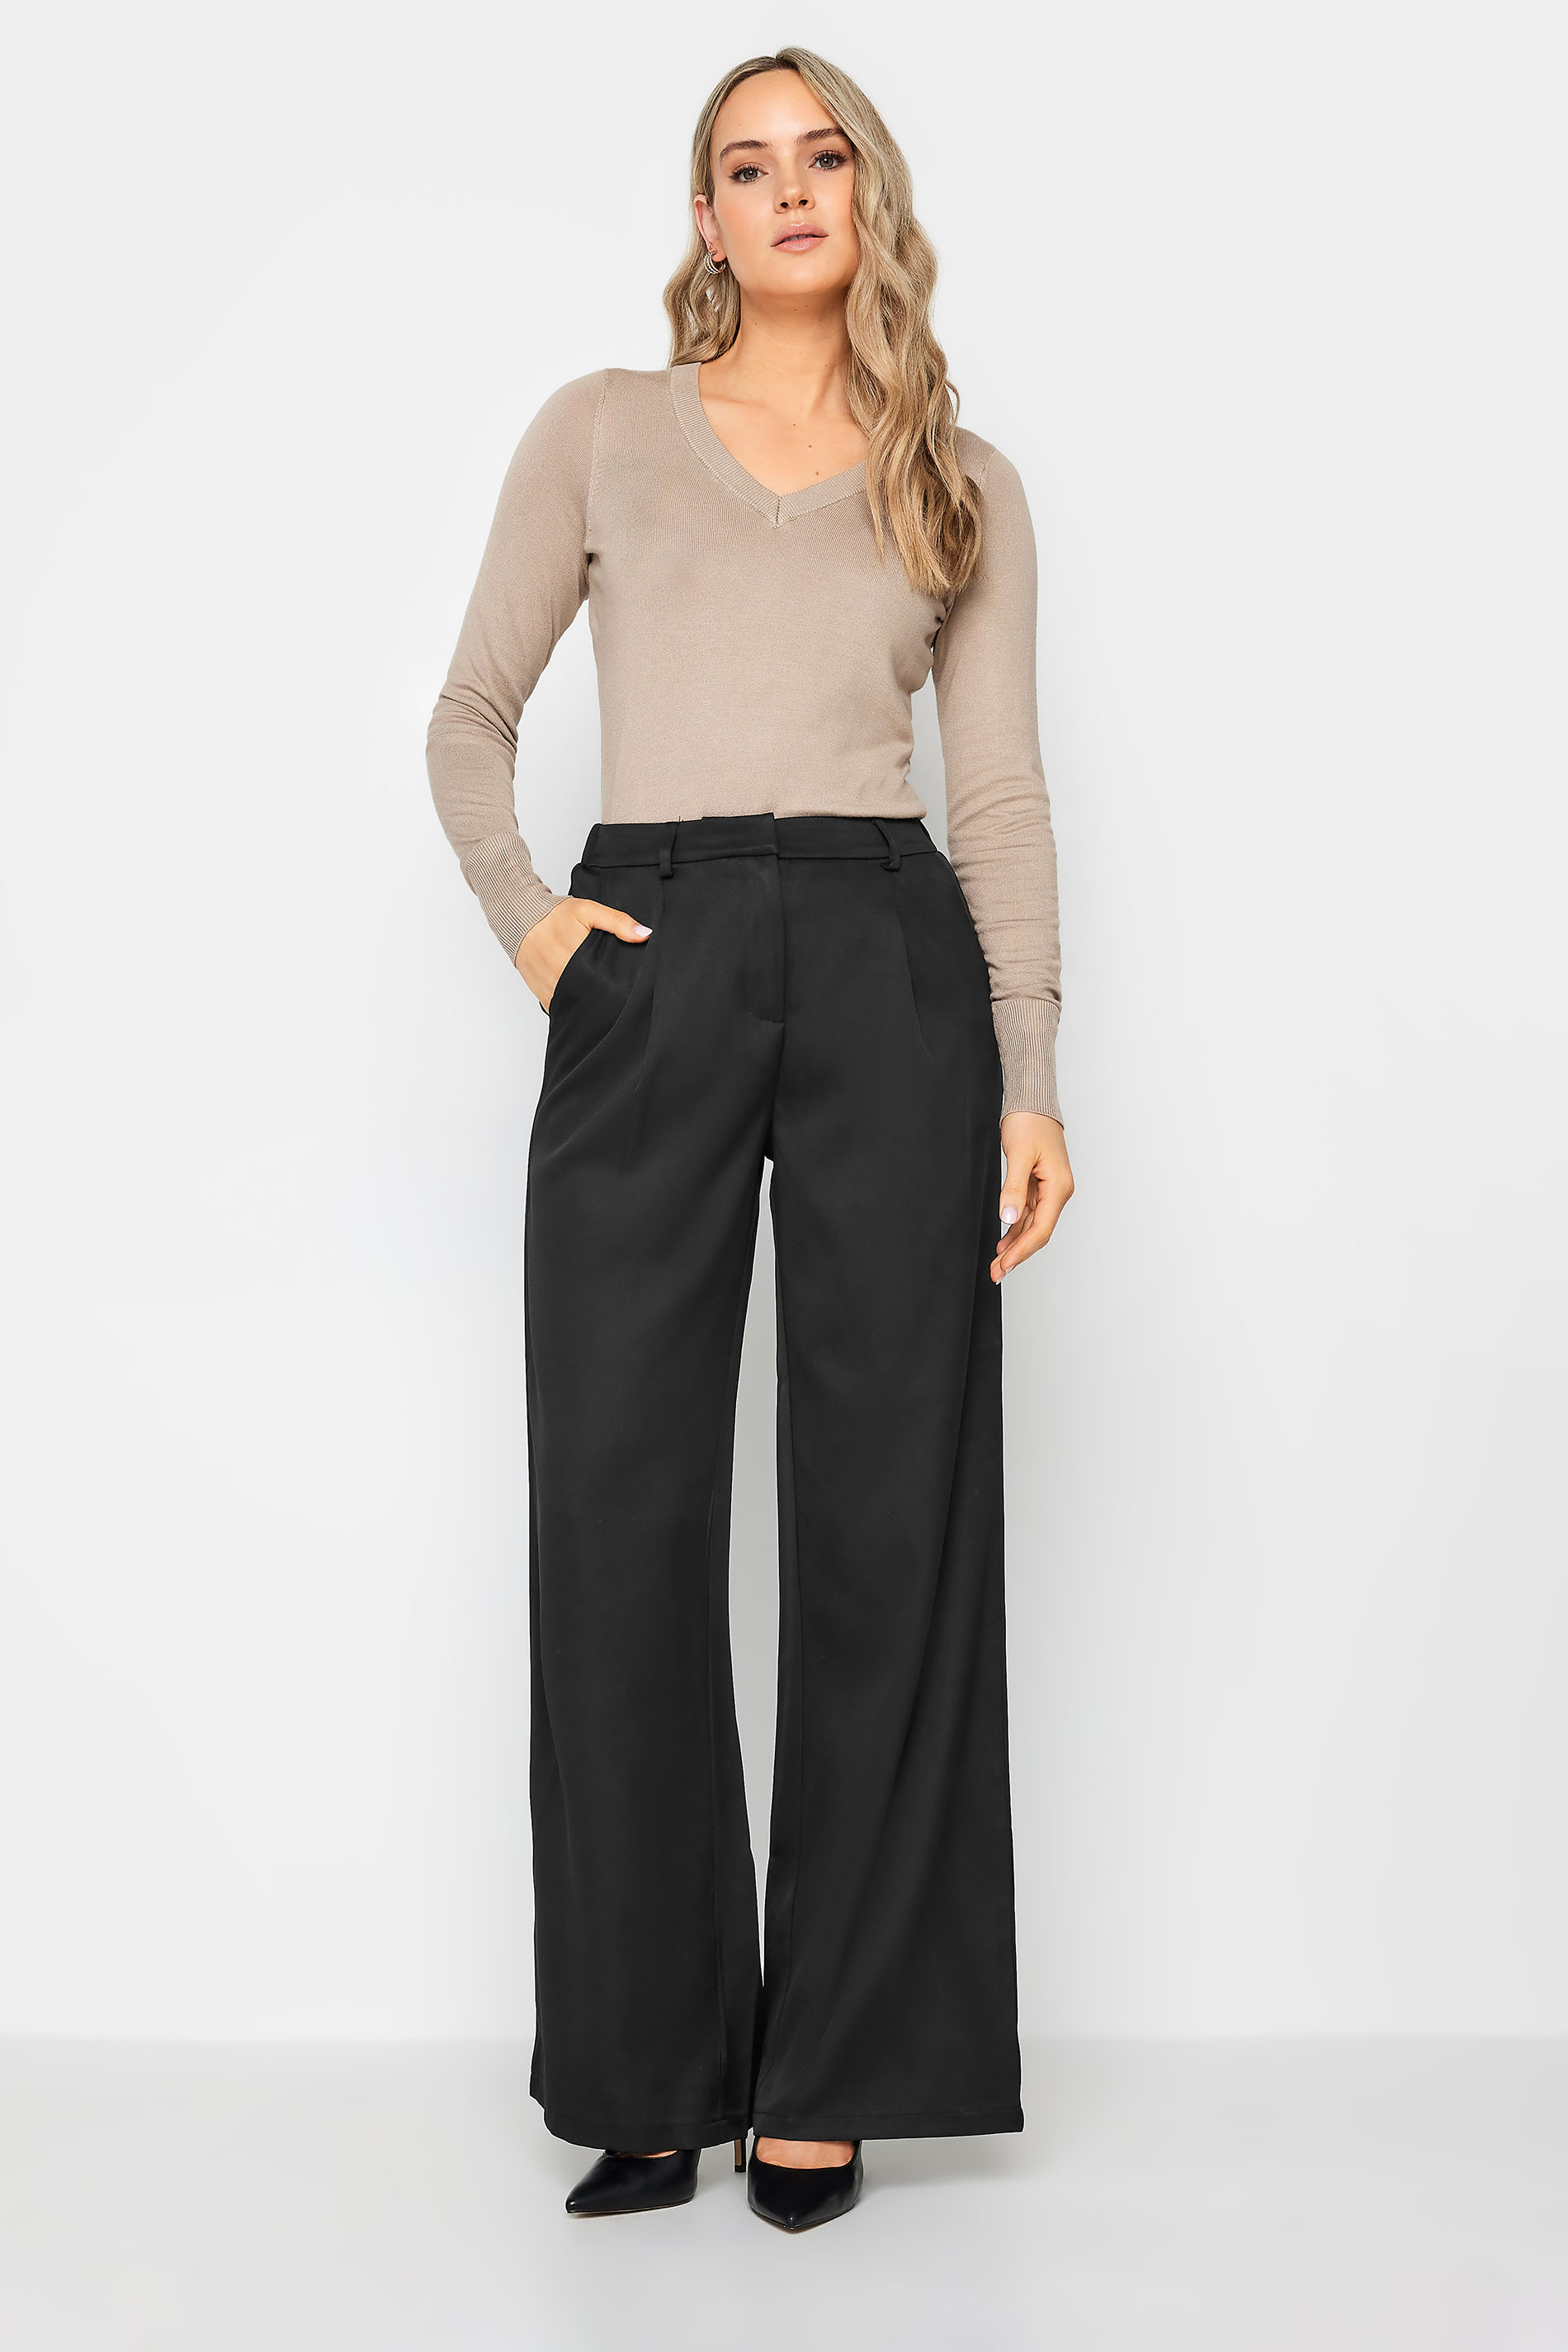 LTS Tall Womens Black Tailored Wide Leg Trousers | Long Tall Sally 2